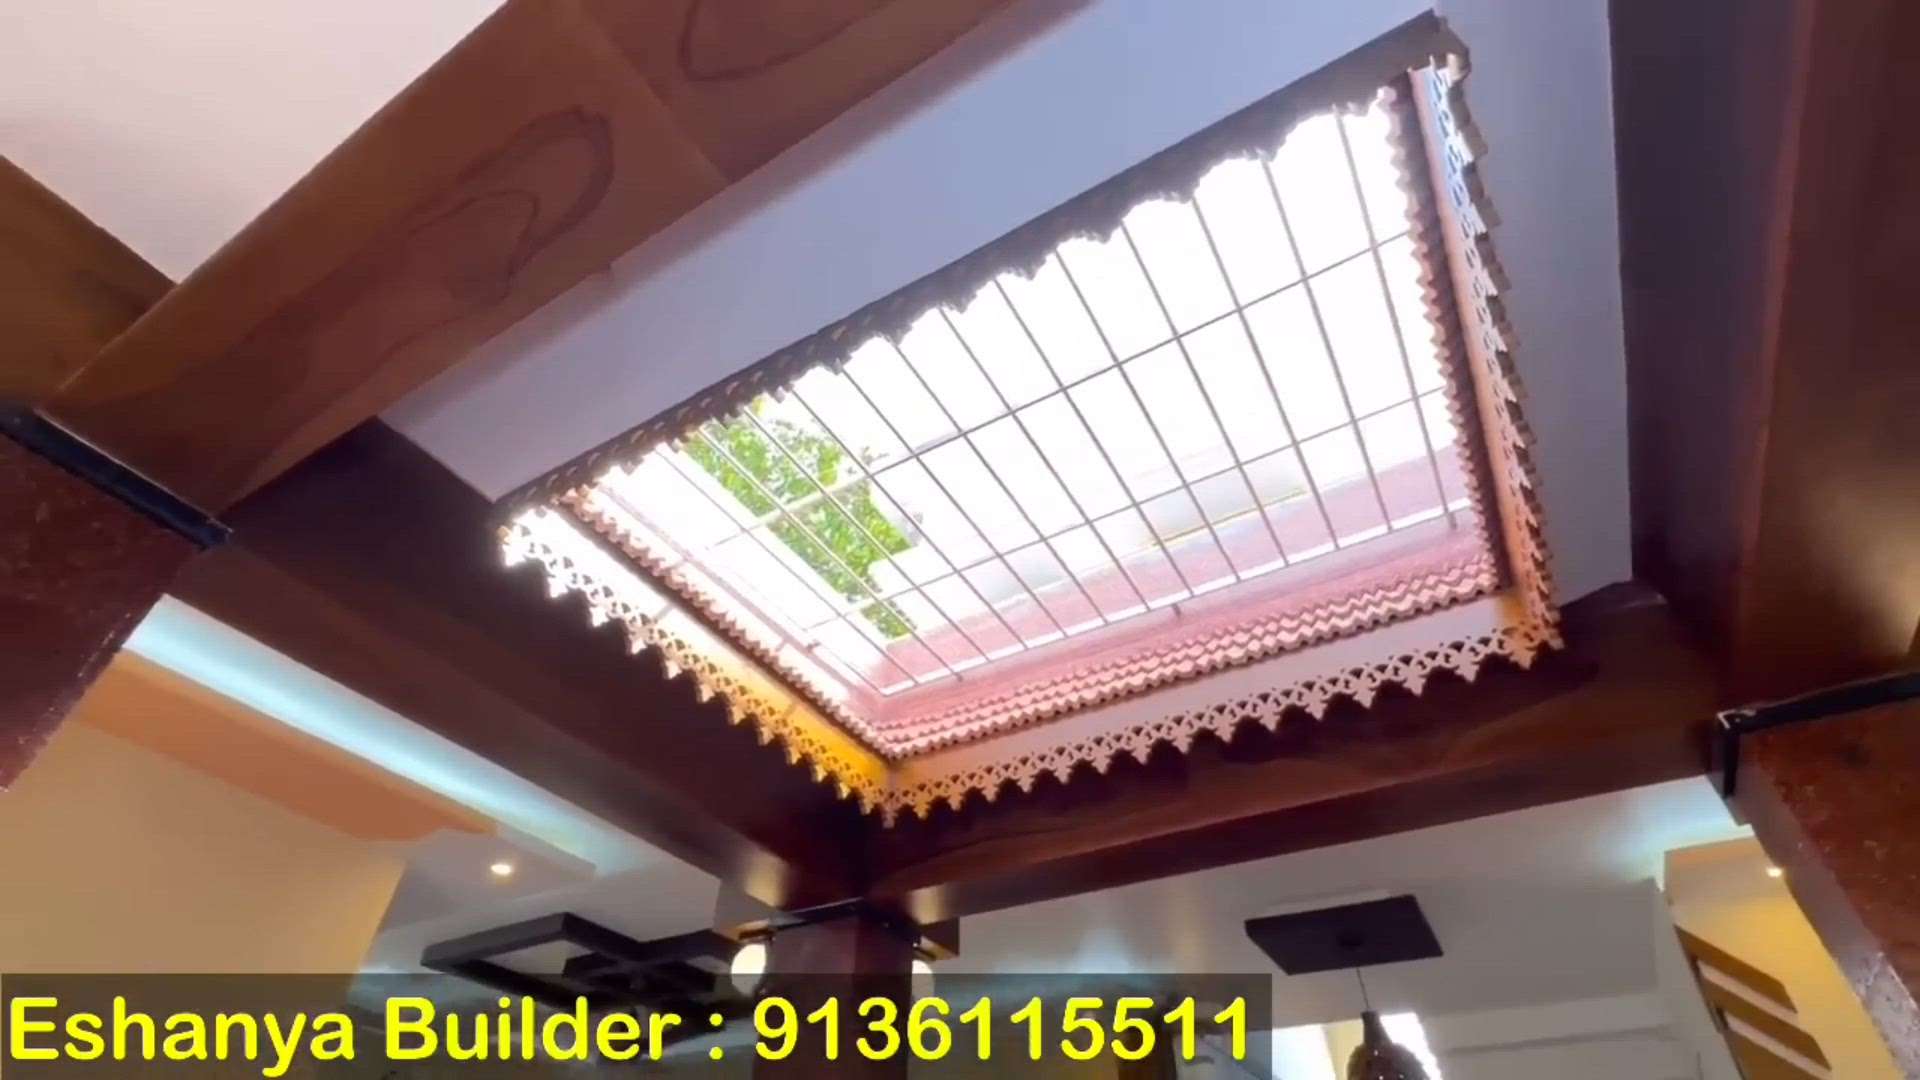 Thank you so much for doing this kind of work.We are very happy that you have placed your trust in us and that we have been able to fulfill your wish. 

#Remote_Control_Roofing_System 

Thank you: Eshanya Builders Mangaluru 

(The video appeared on the Kannada kuvara Vlog YouTube channel)

#team_emagic 
Emagic Technologies LLP 
Contact: 085890 88410